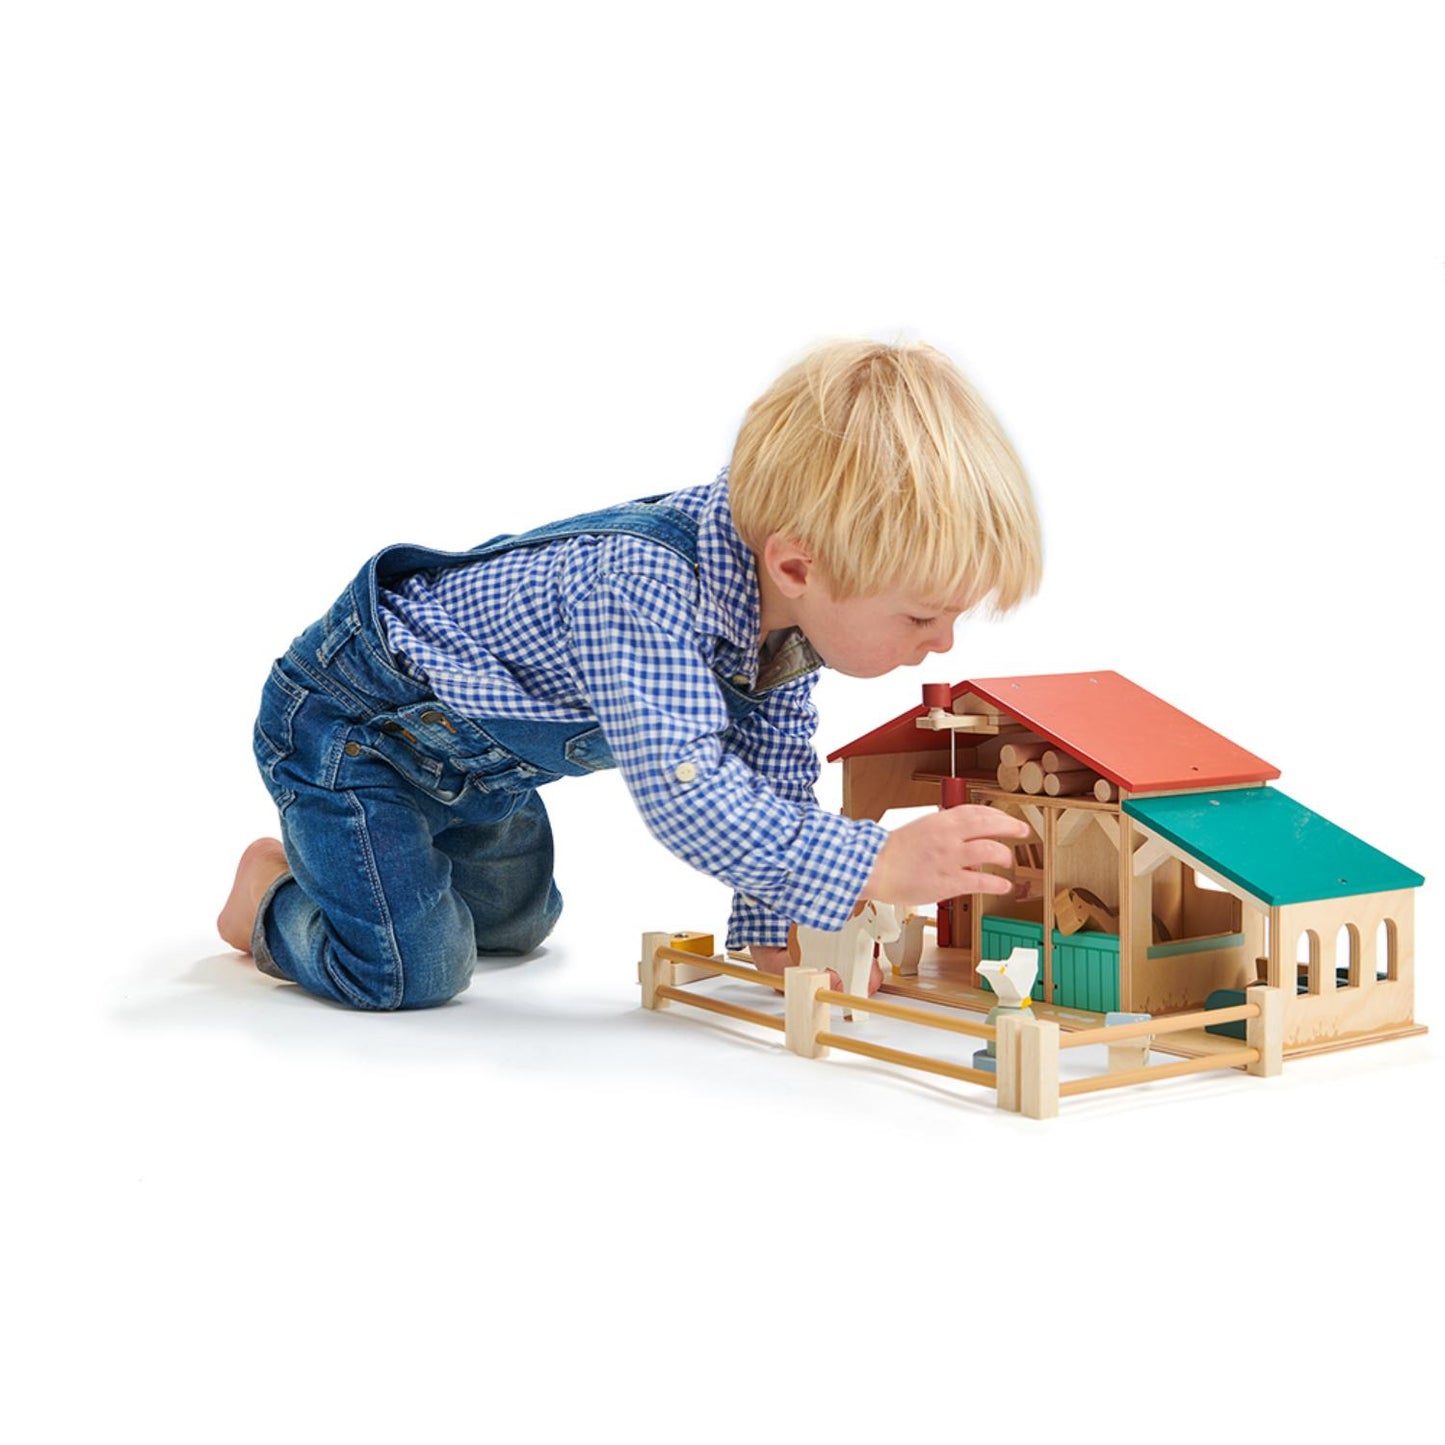 Tender Leaf Toys Wooden Farm | Wooden Toy Play Set For Kids | Lifestyle – Boy Playing With Farm On The Floor | BeoVERDE.ie